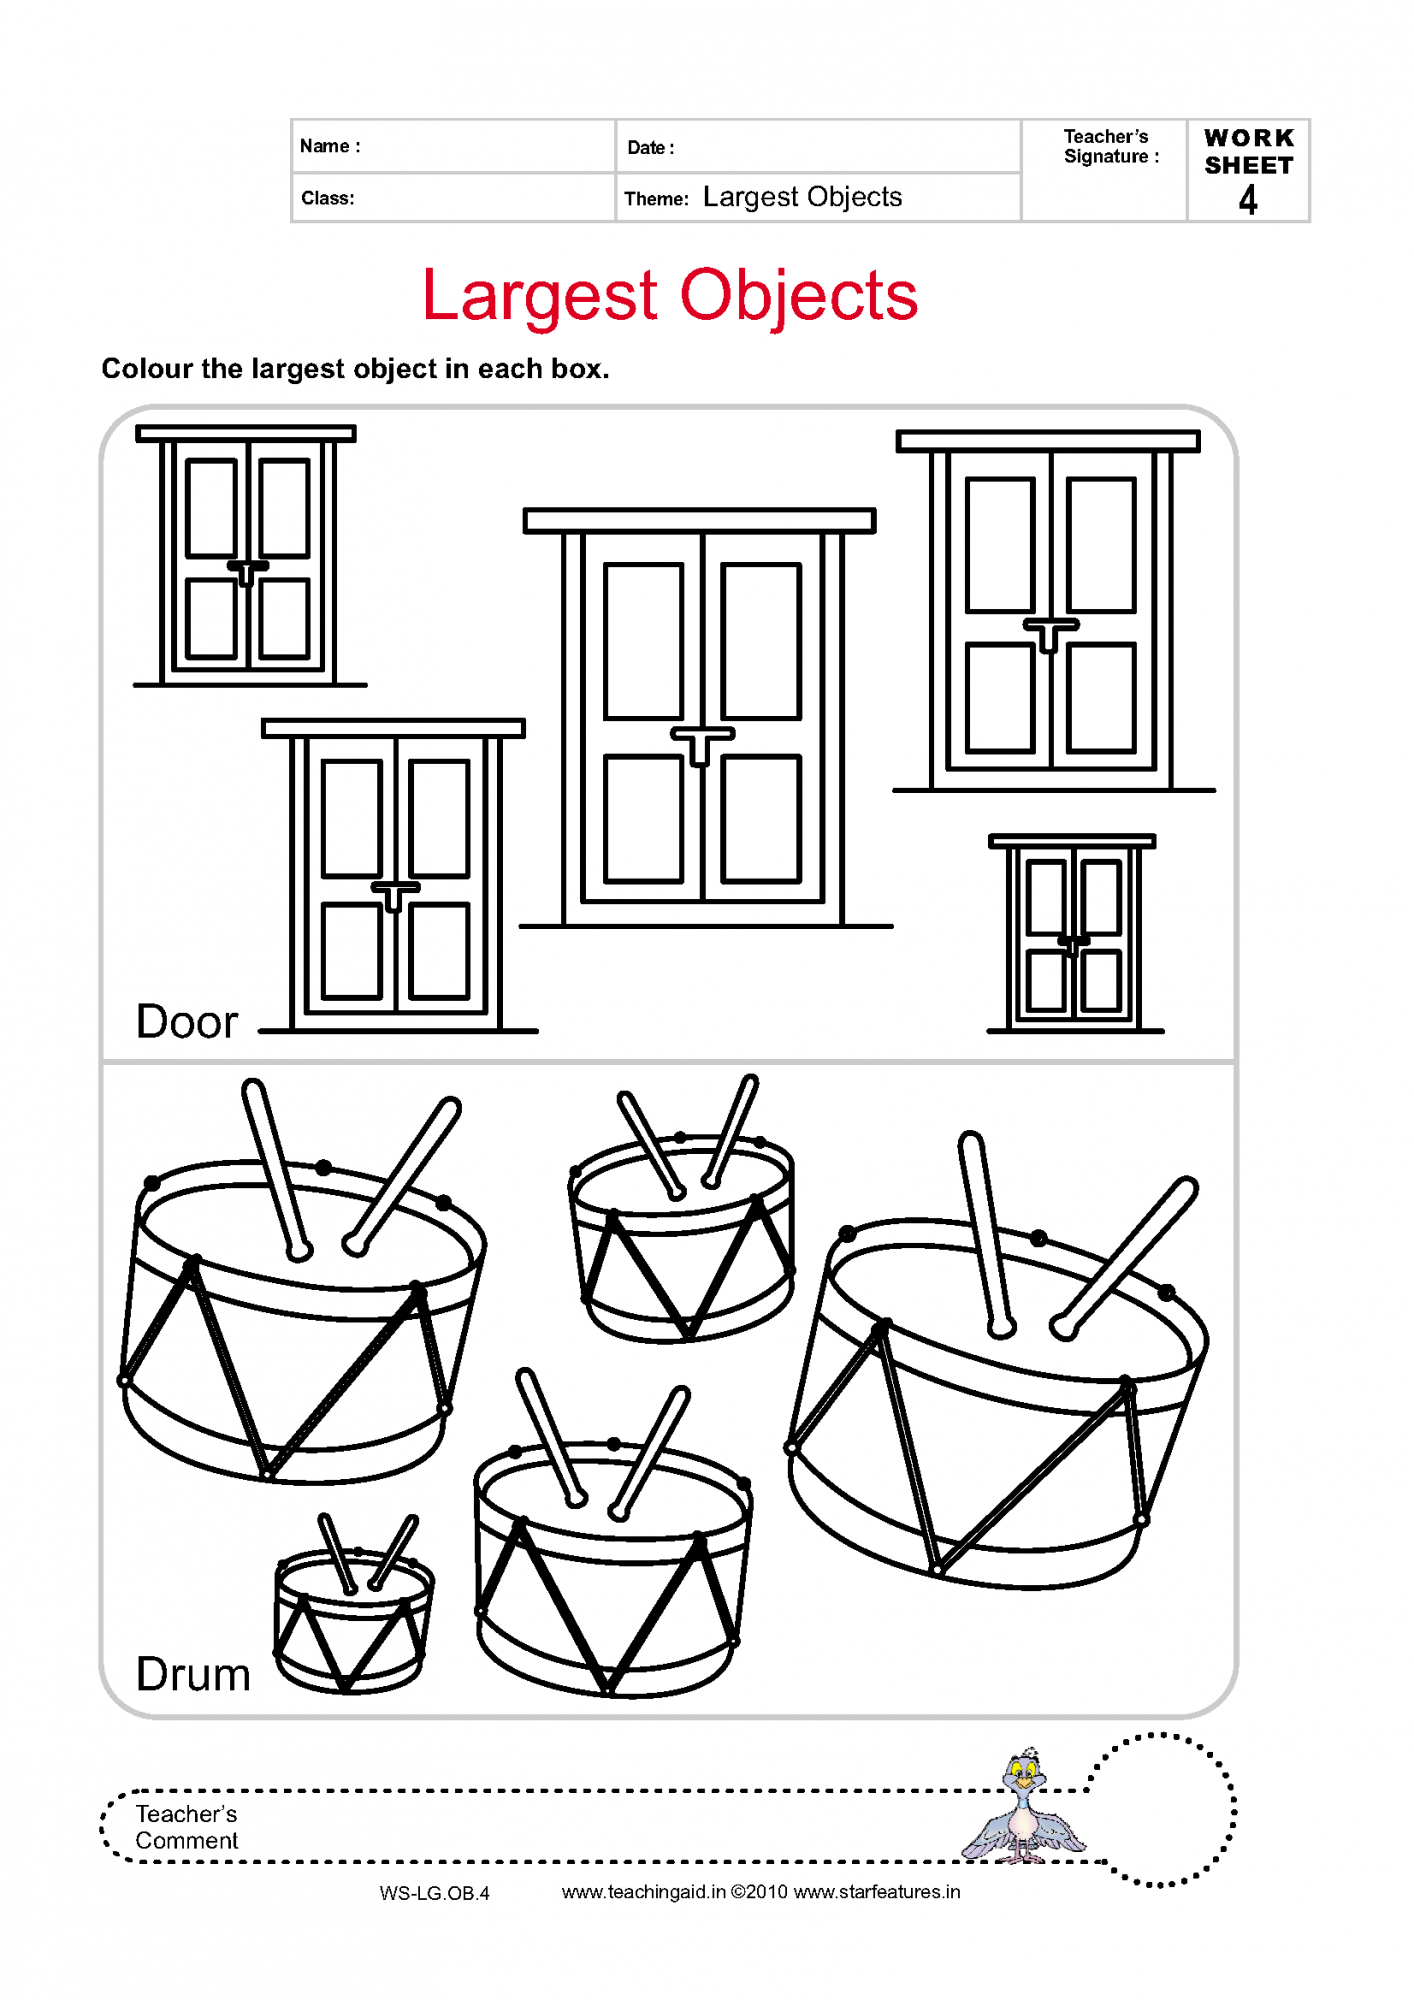 15 Best Images Of Biggest Circle The Object Worksheet Comparing Numbers Kindergarten